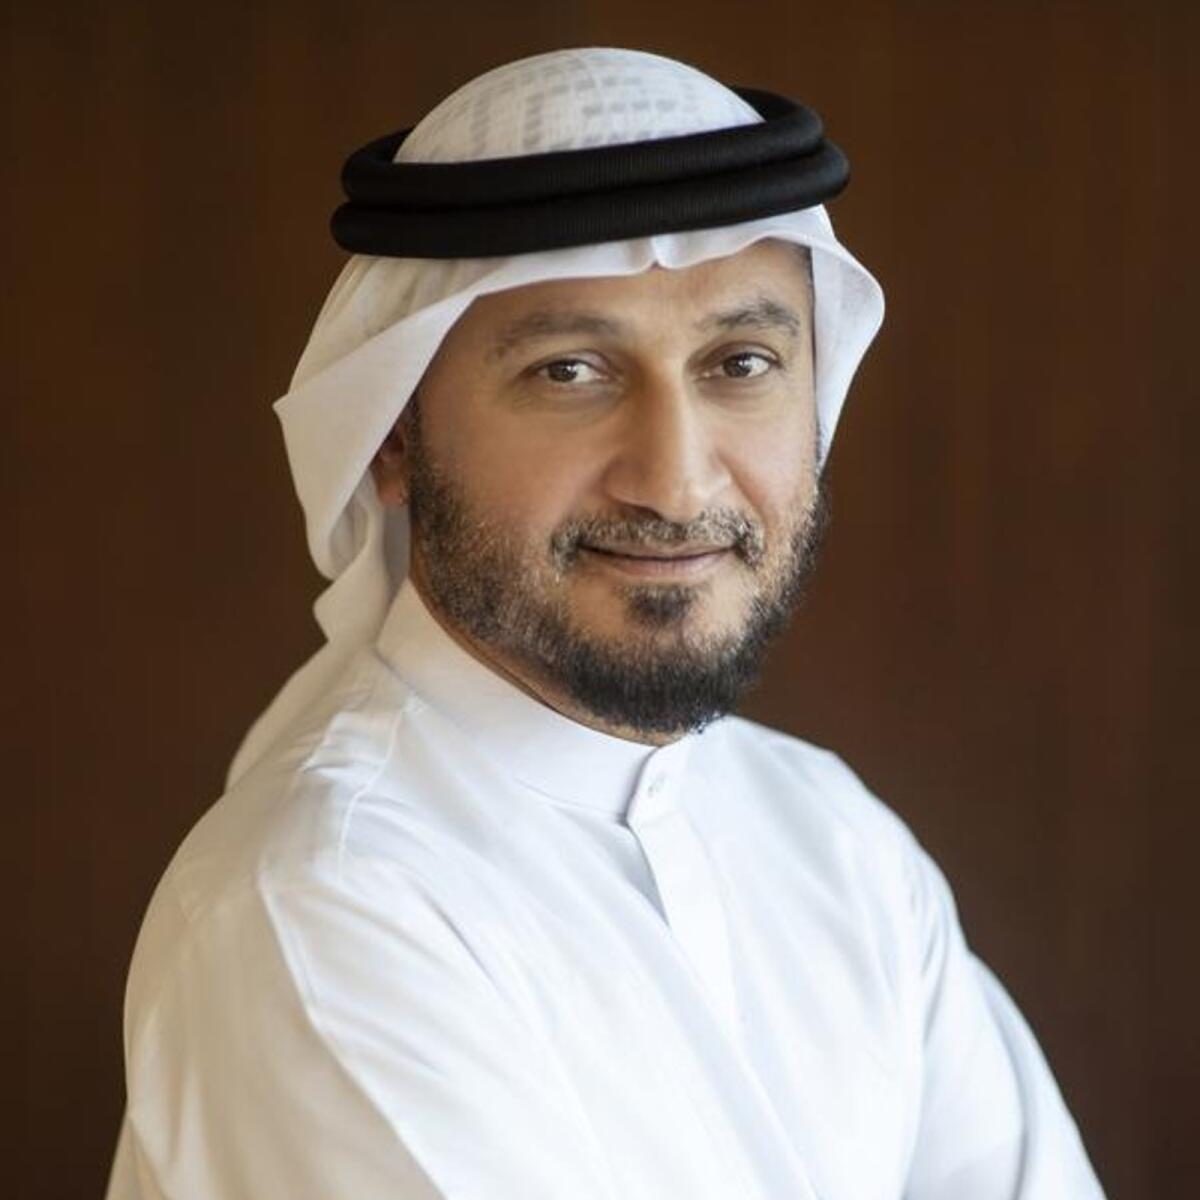 Saleem Al Blooshi, CTO of du, saidu is committed to working with industry leaders around the world to create new solutions that help us stay at the forefront of digital innovation.